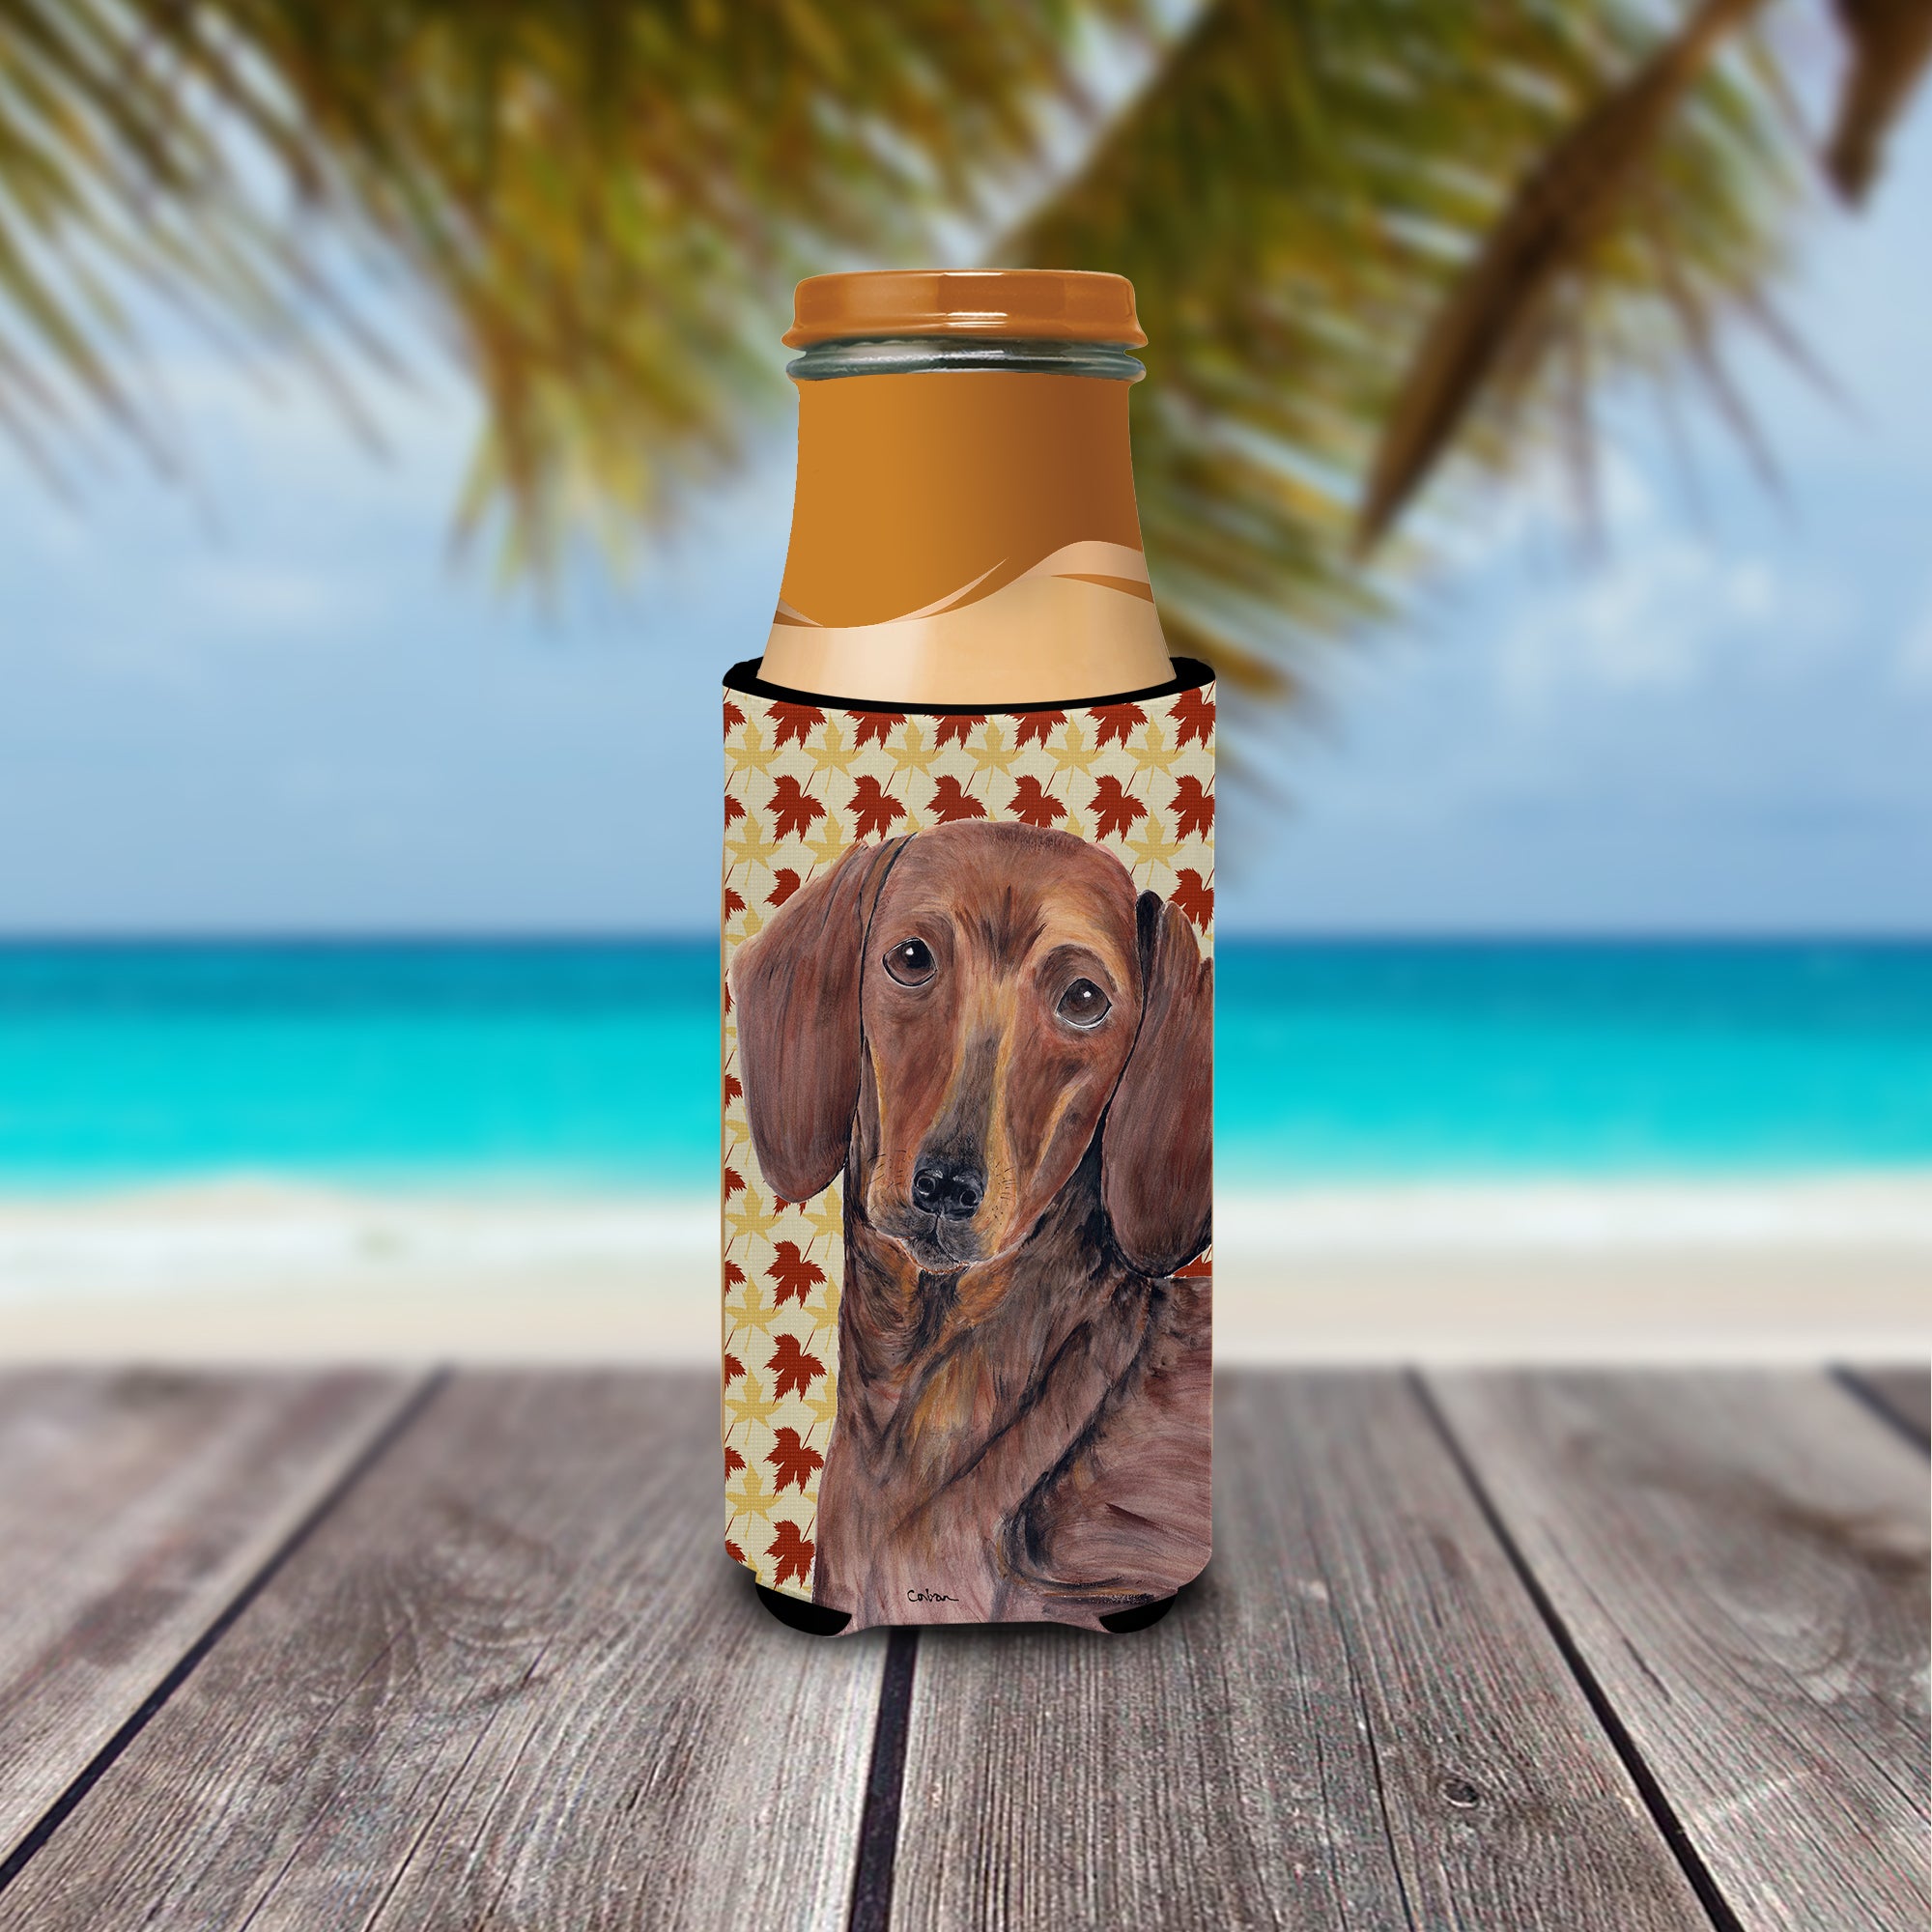 Dachshund Fall Leaves Portrait Ultra Beverage Insulators for slim cans SC9208MUK